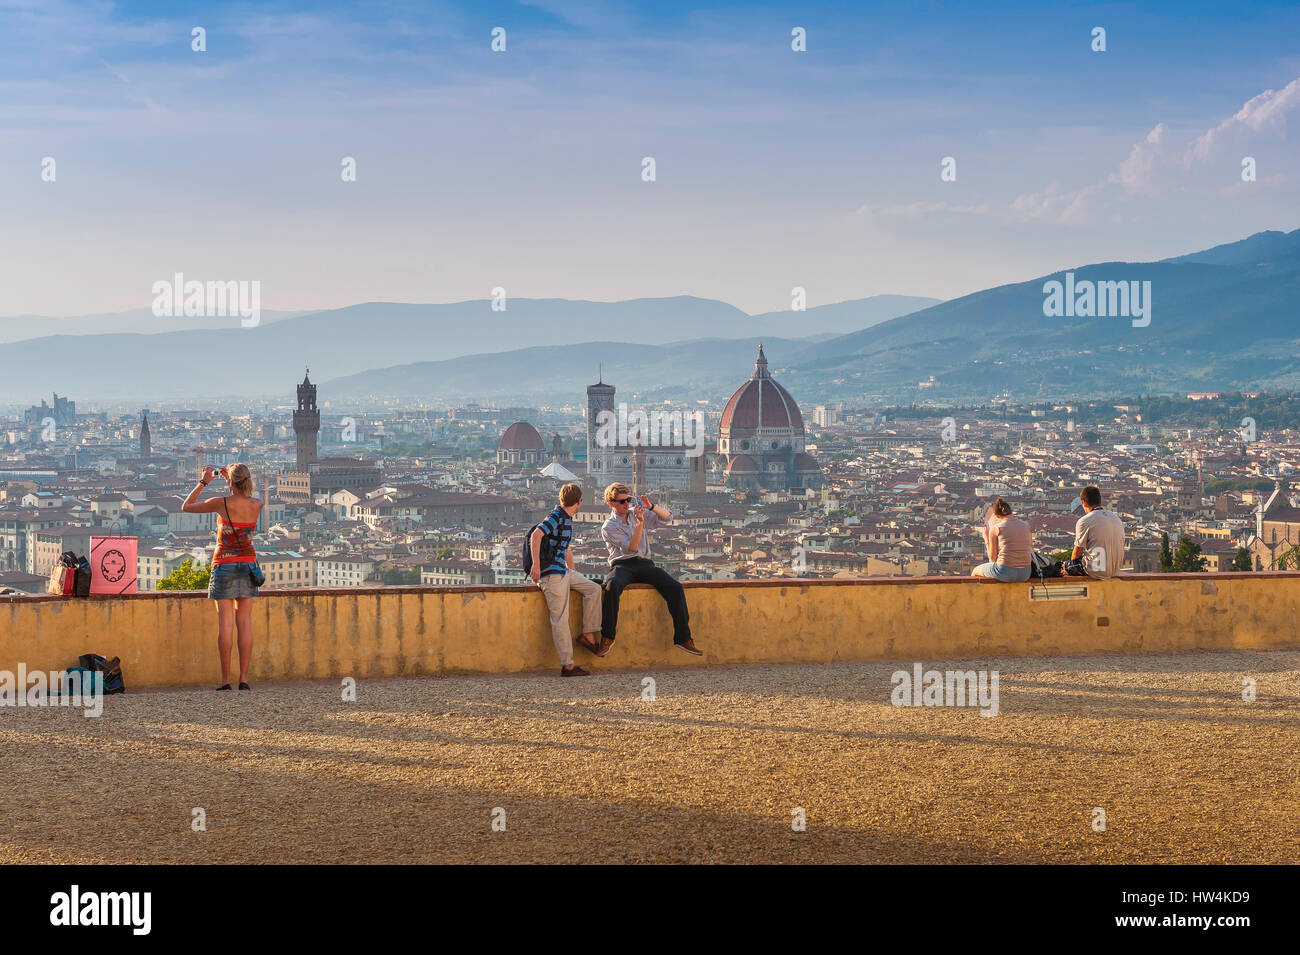 Florence tourism, view of tourists gathered on a hillside terrace overlooking the scenic city of Florence just before sunset, Firenze,Tuscany, Italy. Stock Photo